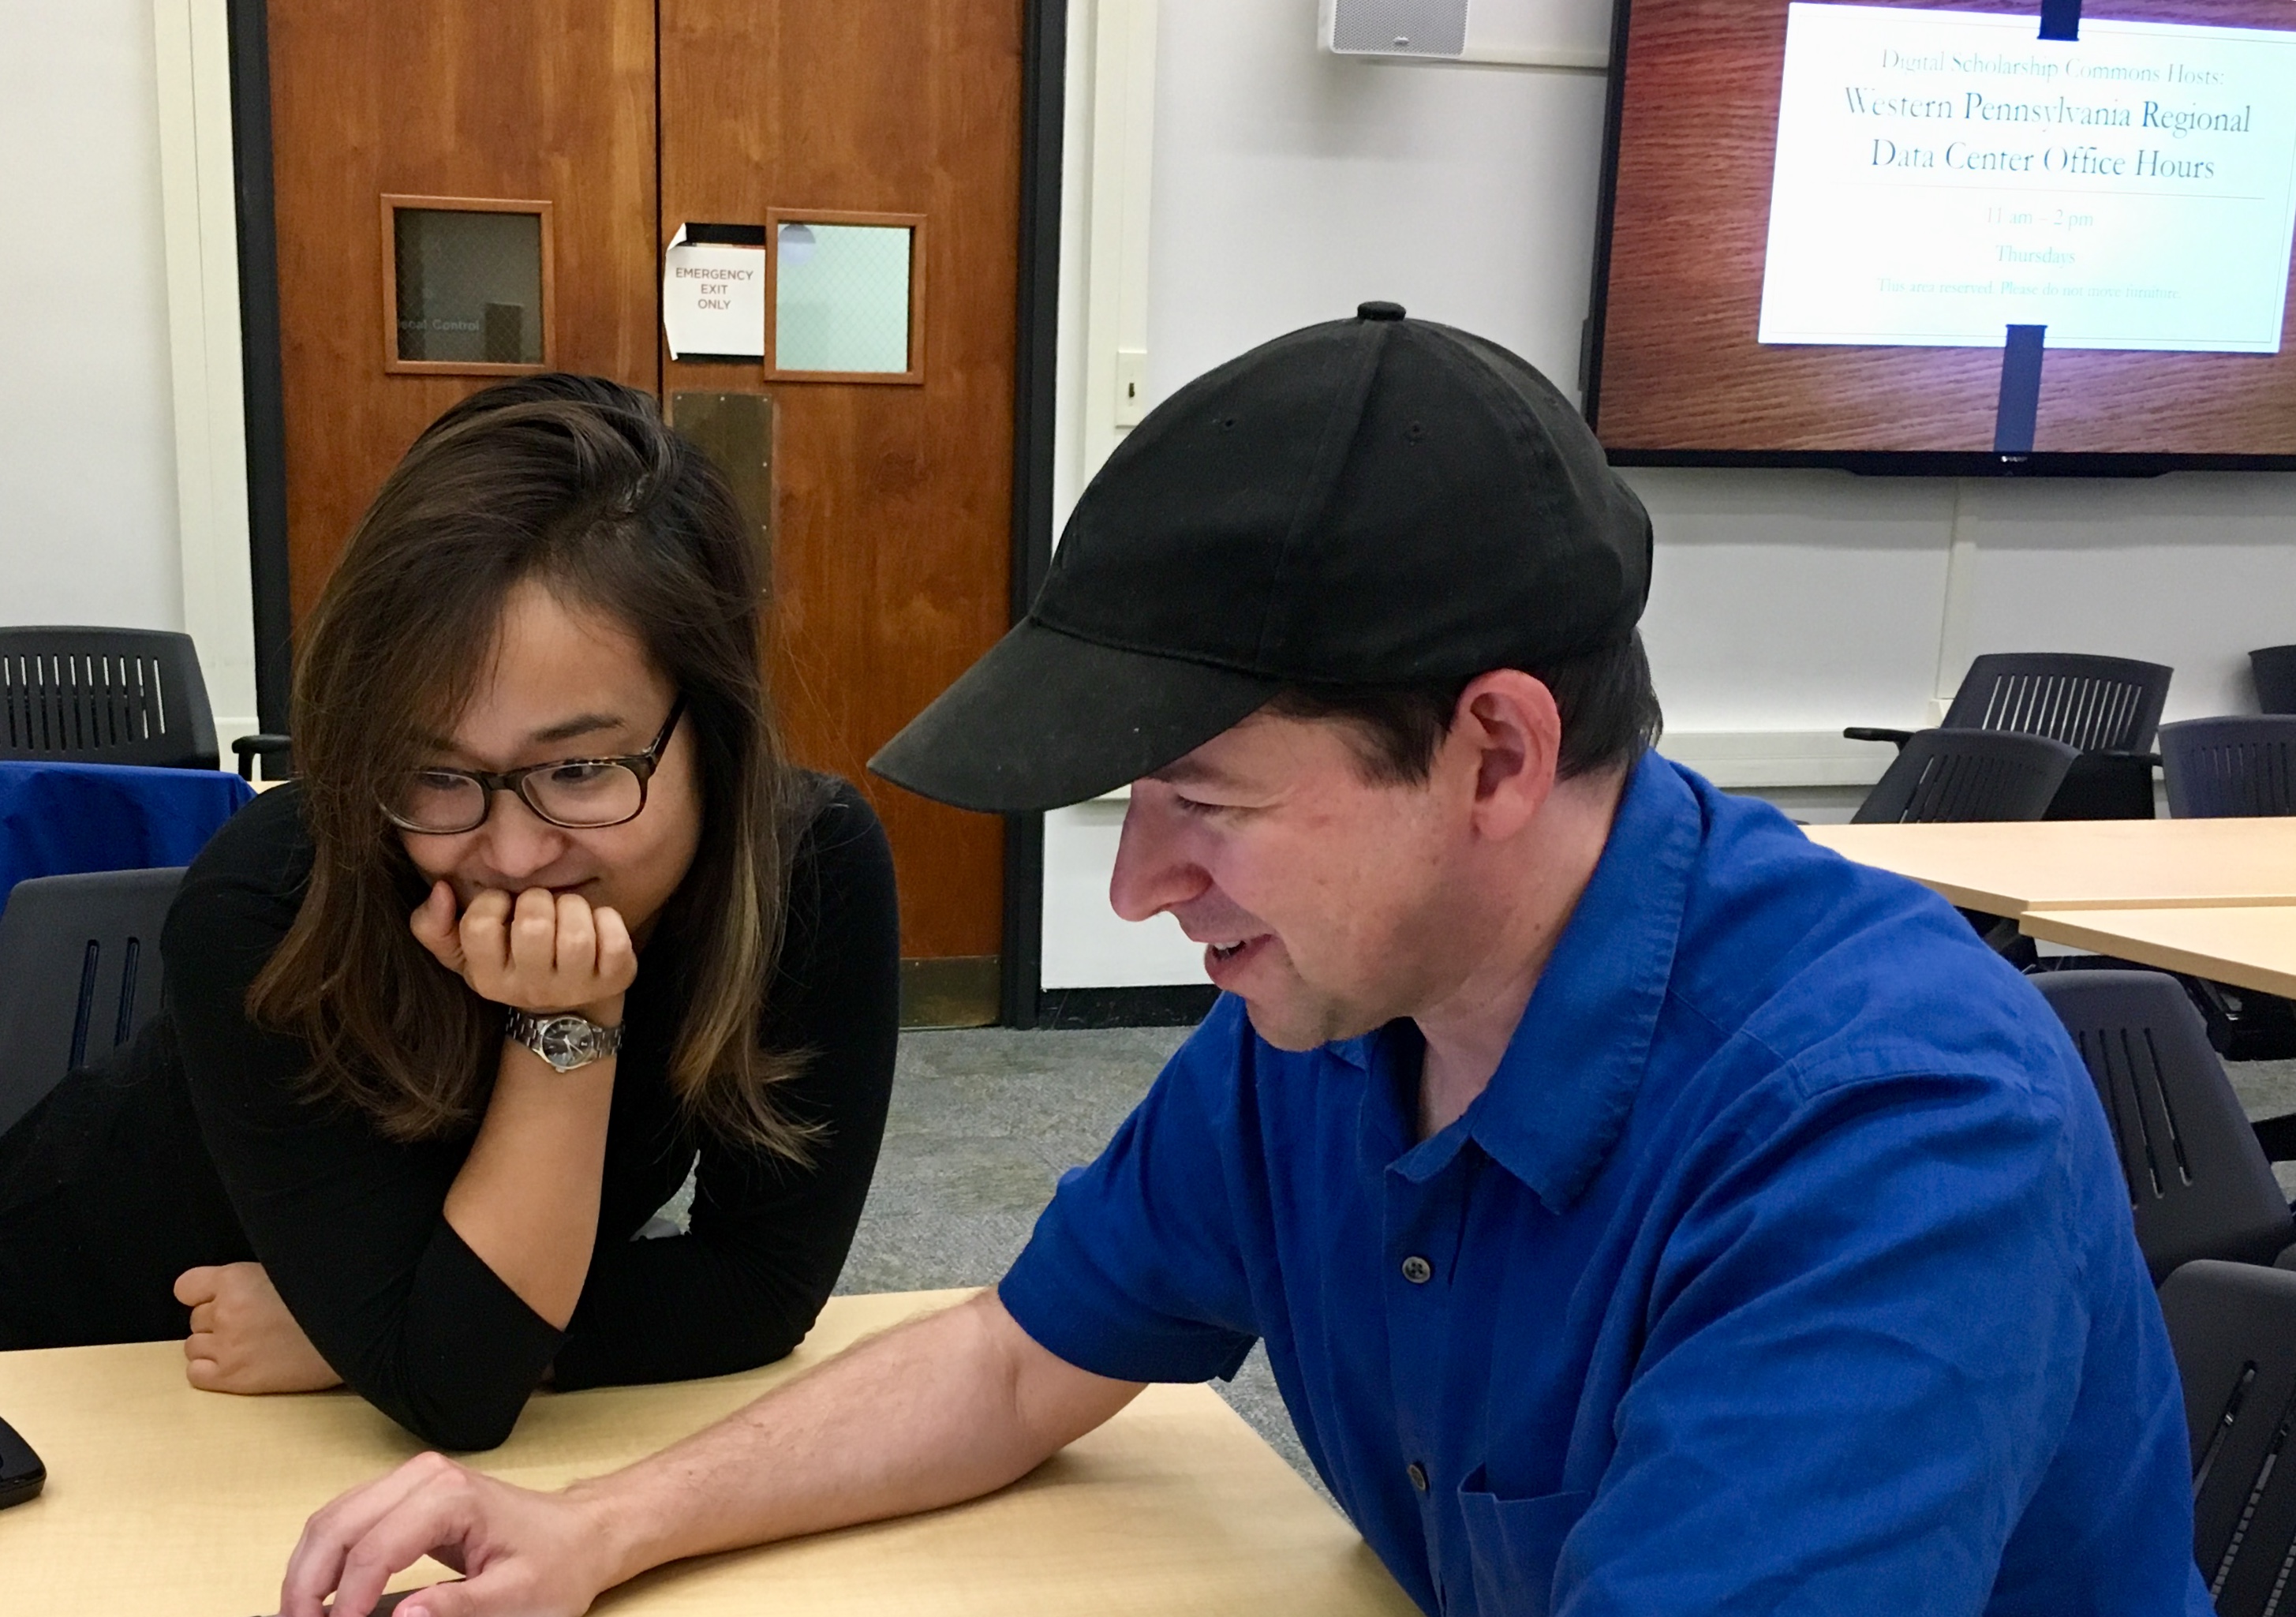 Claire Suh with a team member at the Western Pennsylvania Regional Data Center (WPRDC)